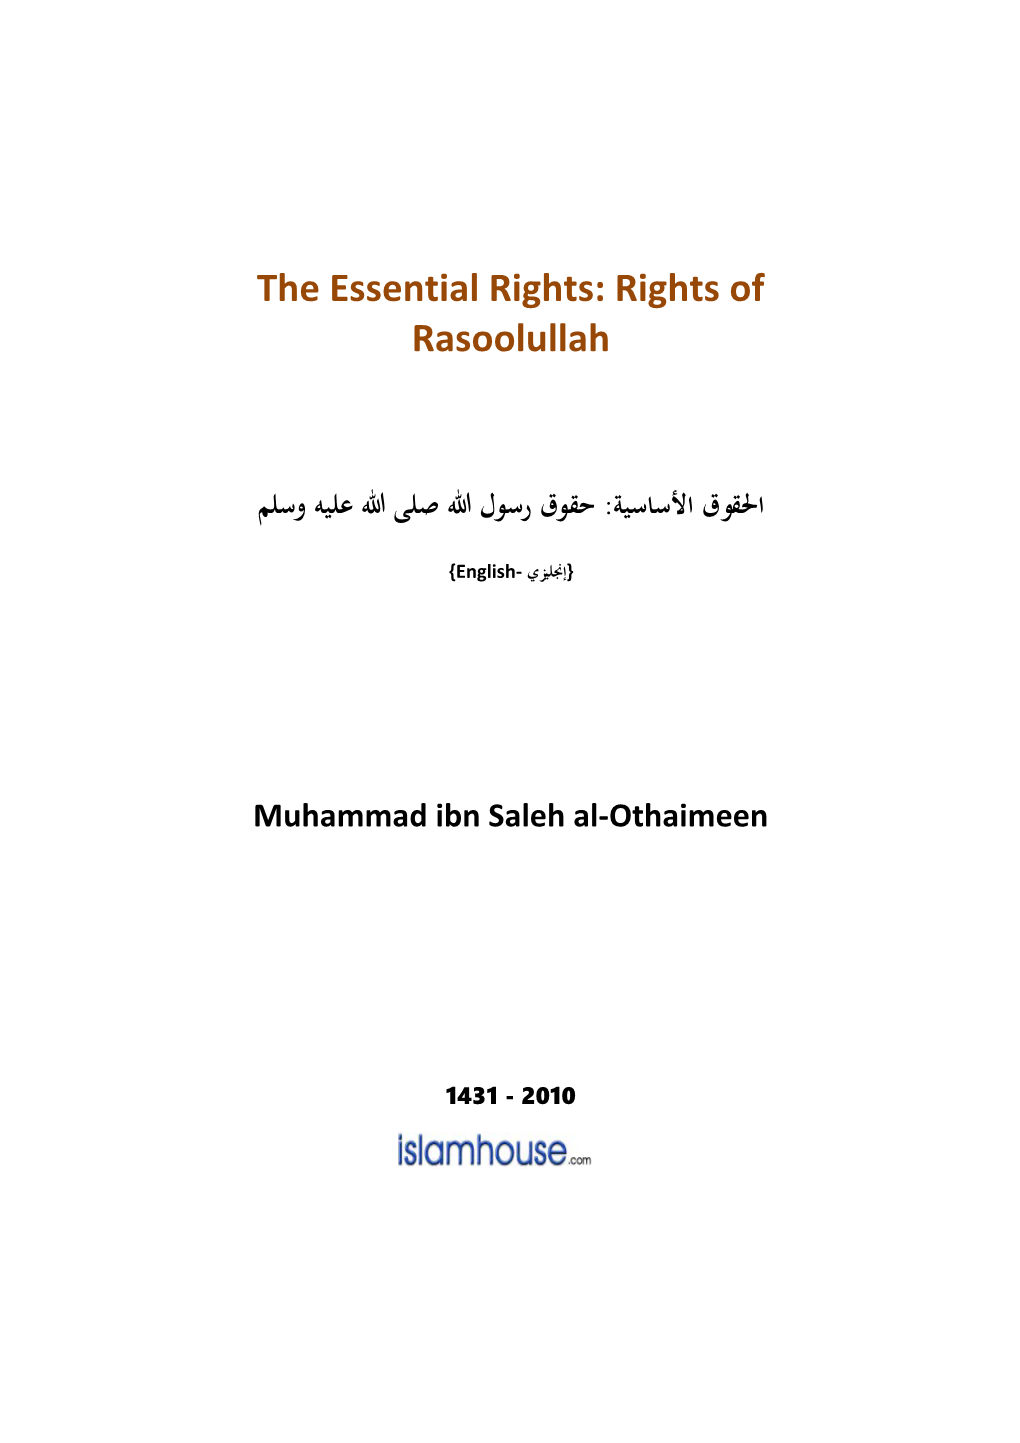 The Essential Rights: Rights of Rasoolullah